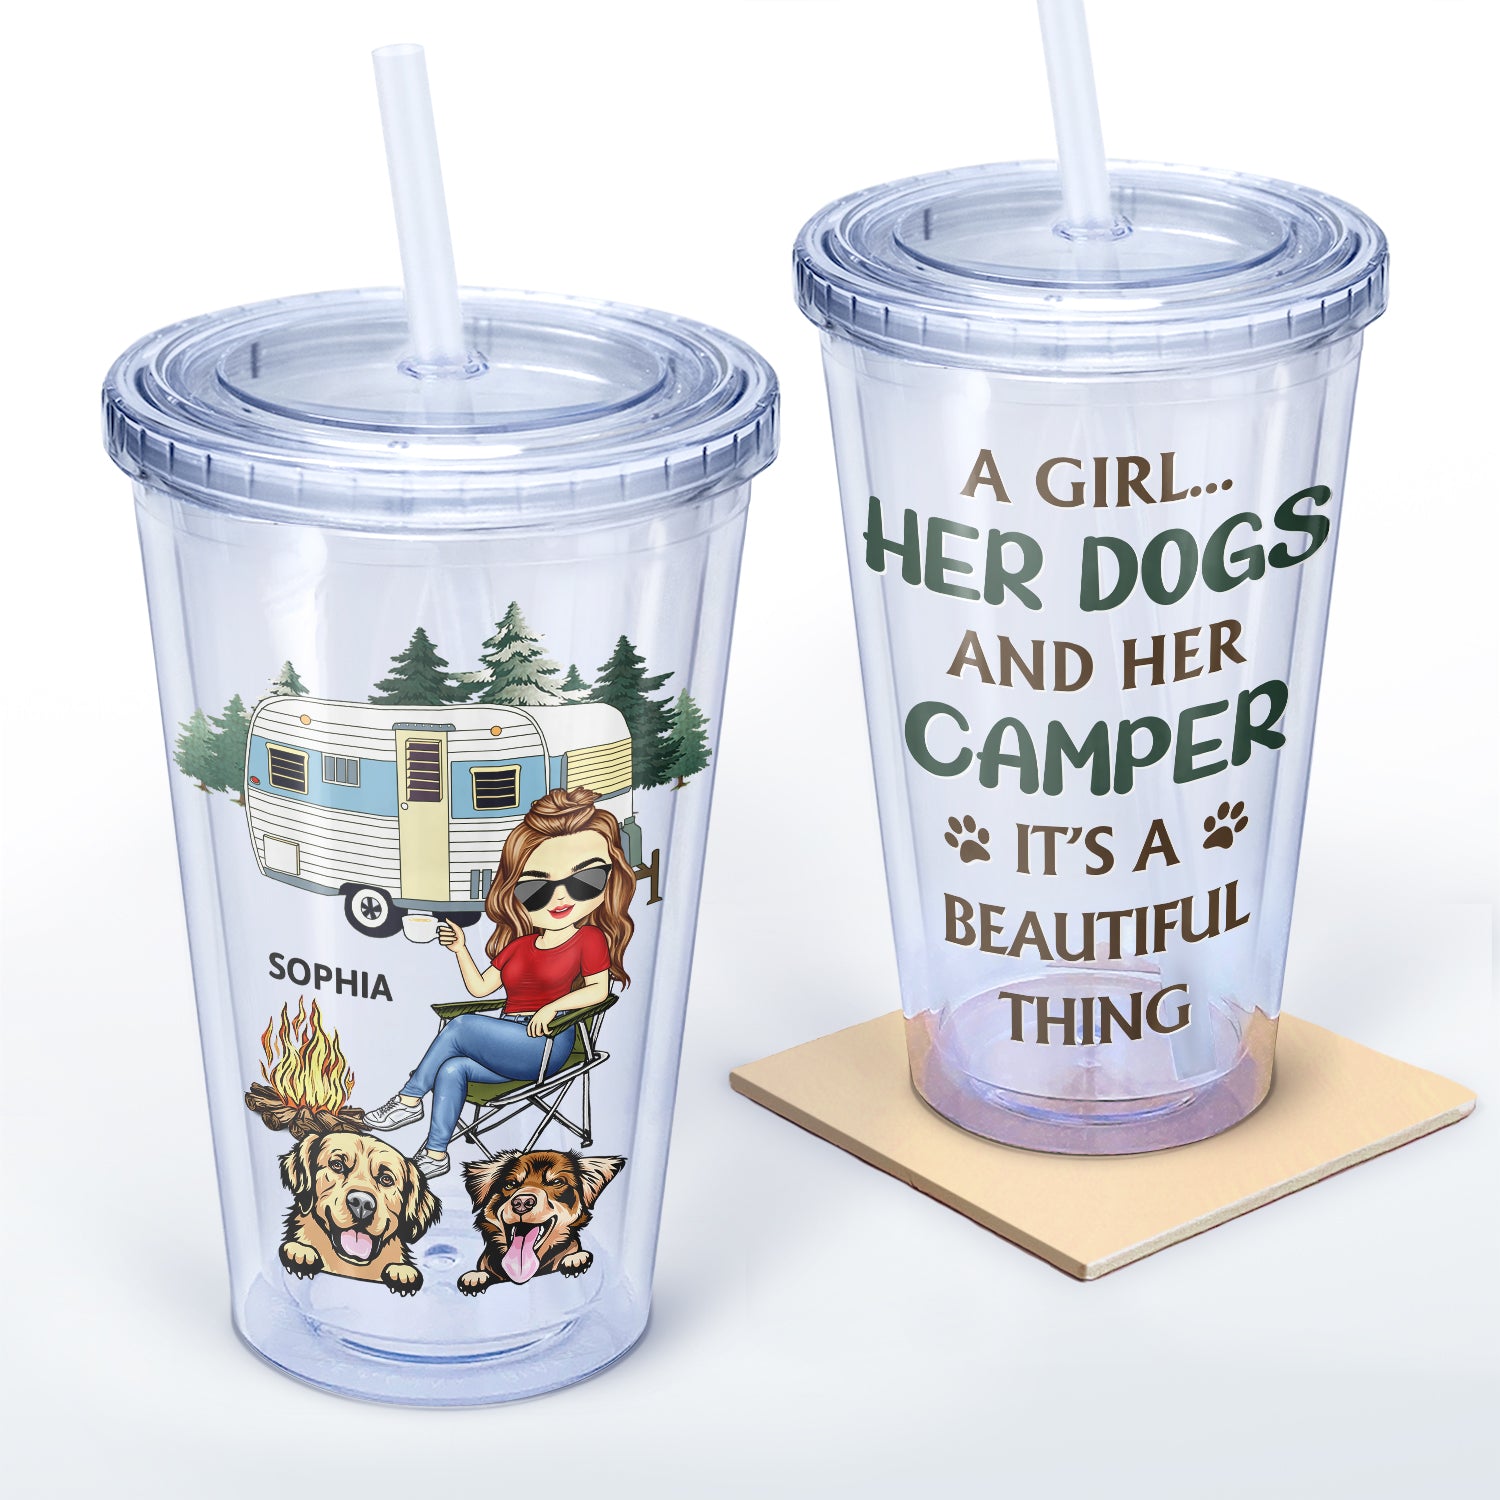 It's A Beautiful Thing - Camping Gift For Dog Lovers, Cat Lovers - Personalized Acrylic Insulated Tumbler With Straw